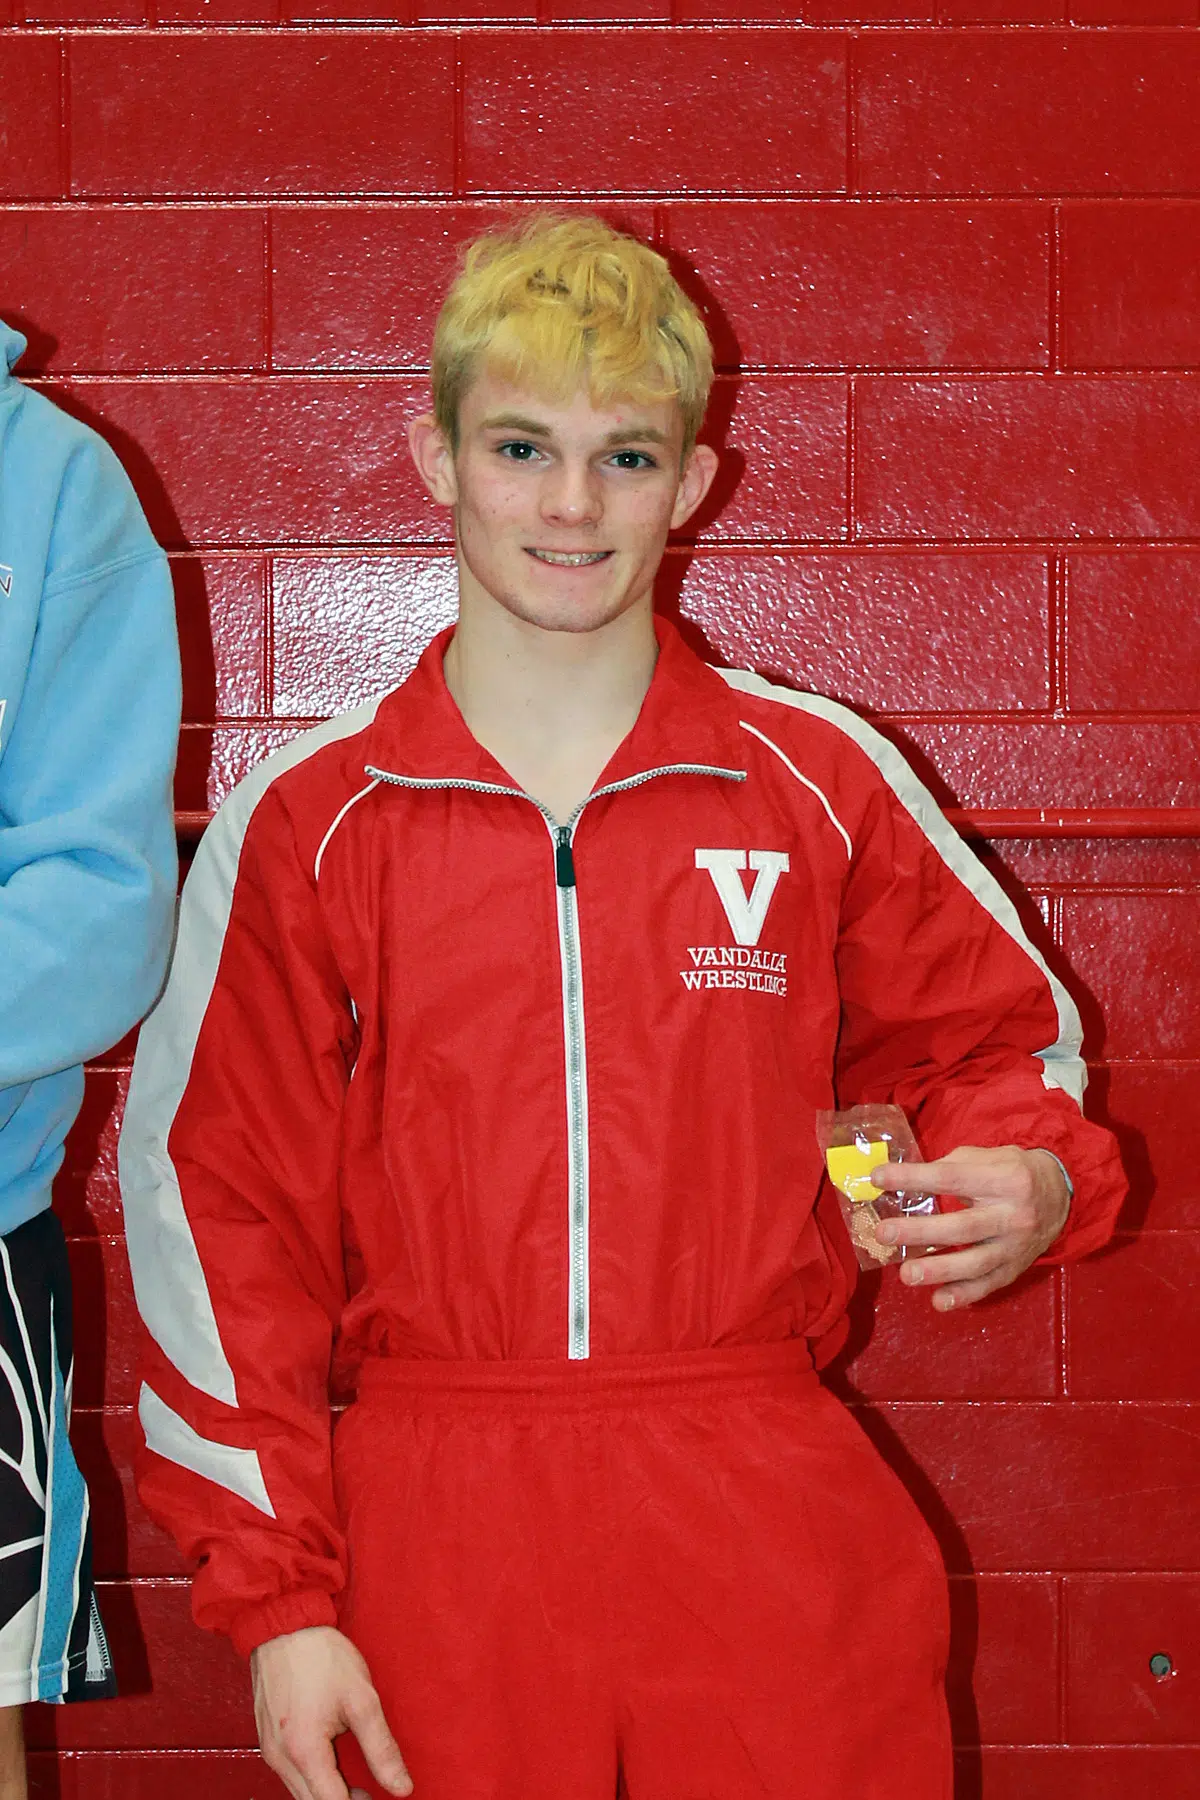 Dakota Gasaway Takes 4th Place at Individual Wrestling Sectional, Qualifies for State Tournament